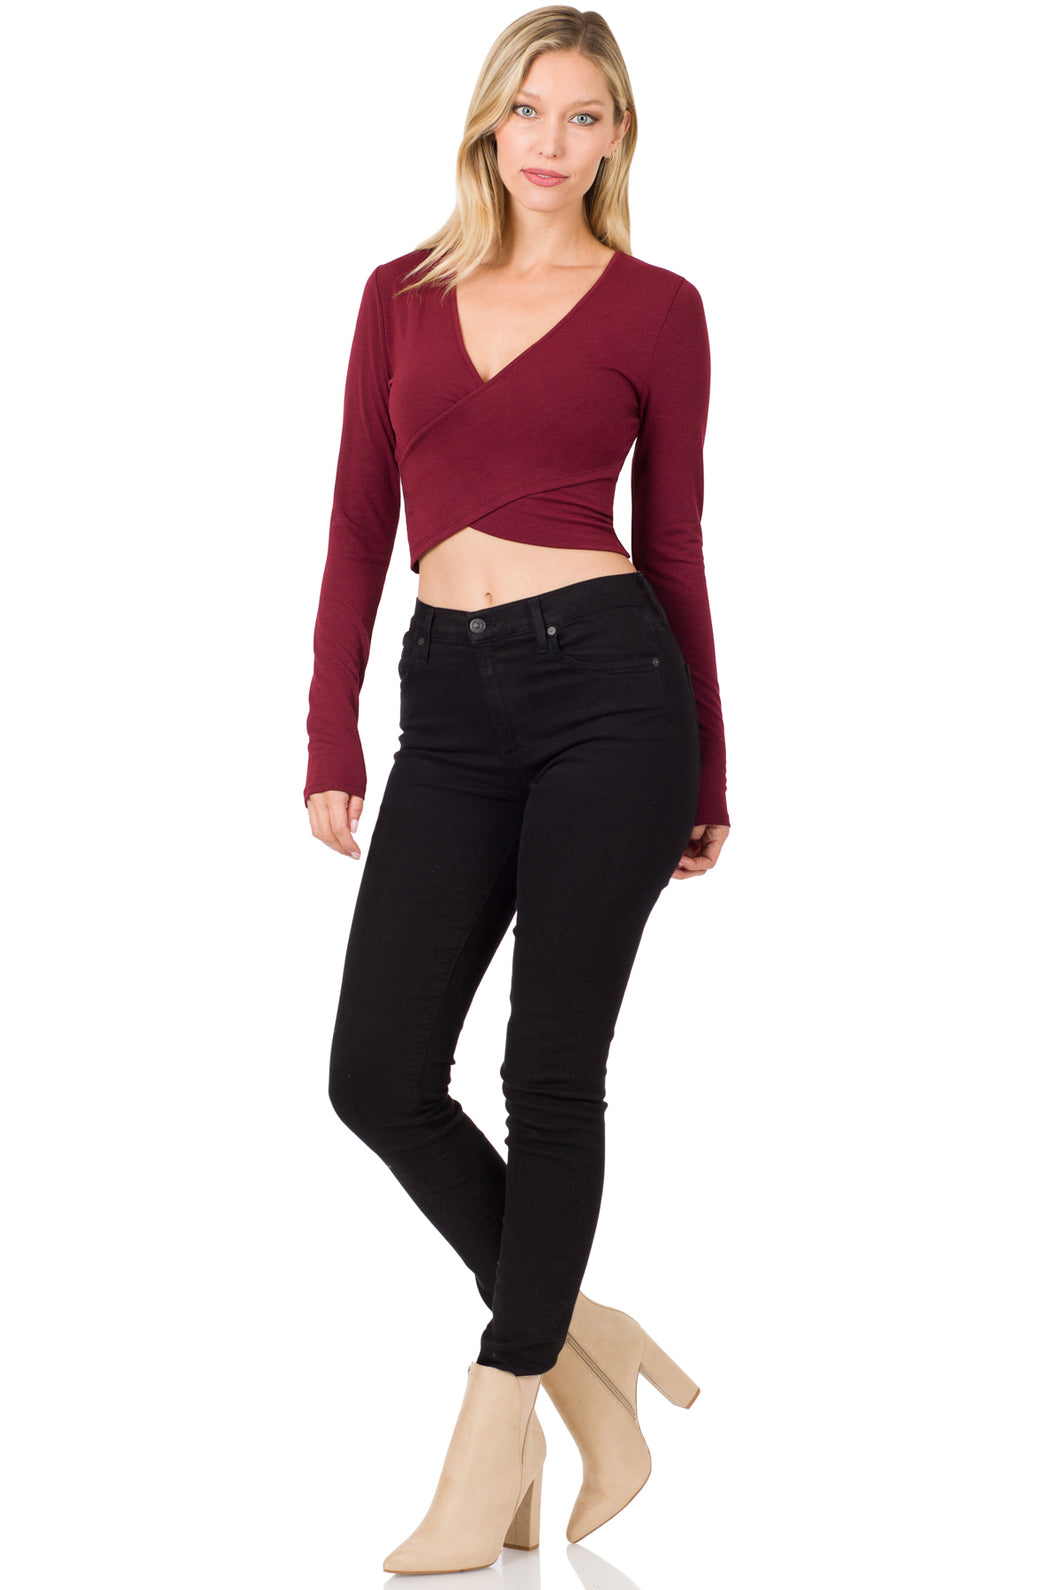 RIBBED TWIST FRONT TOP (Burgundy)